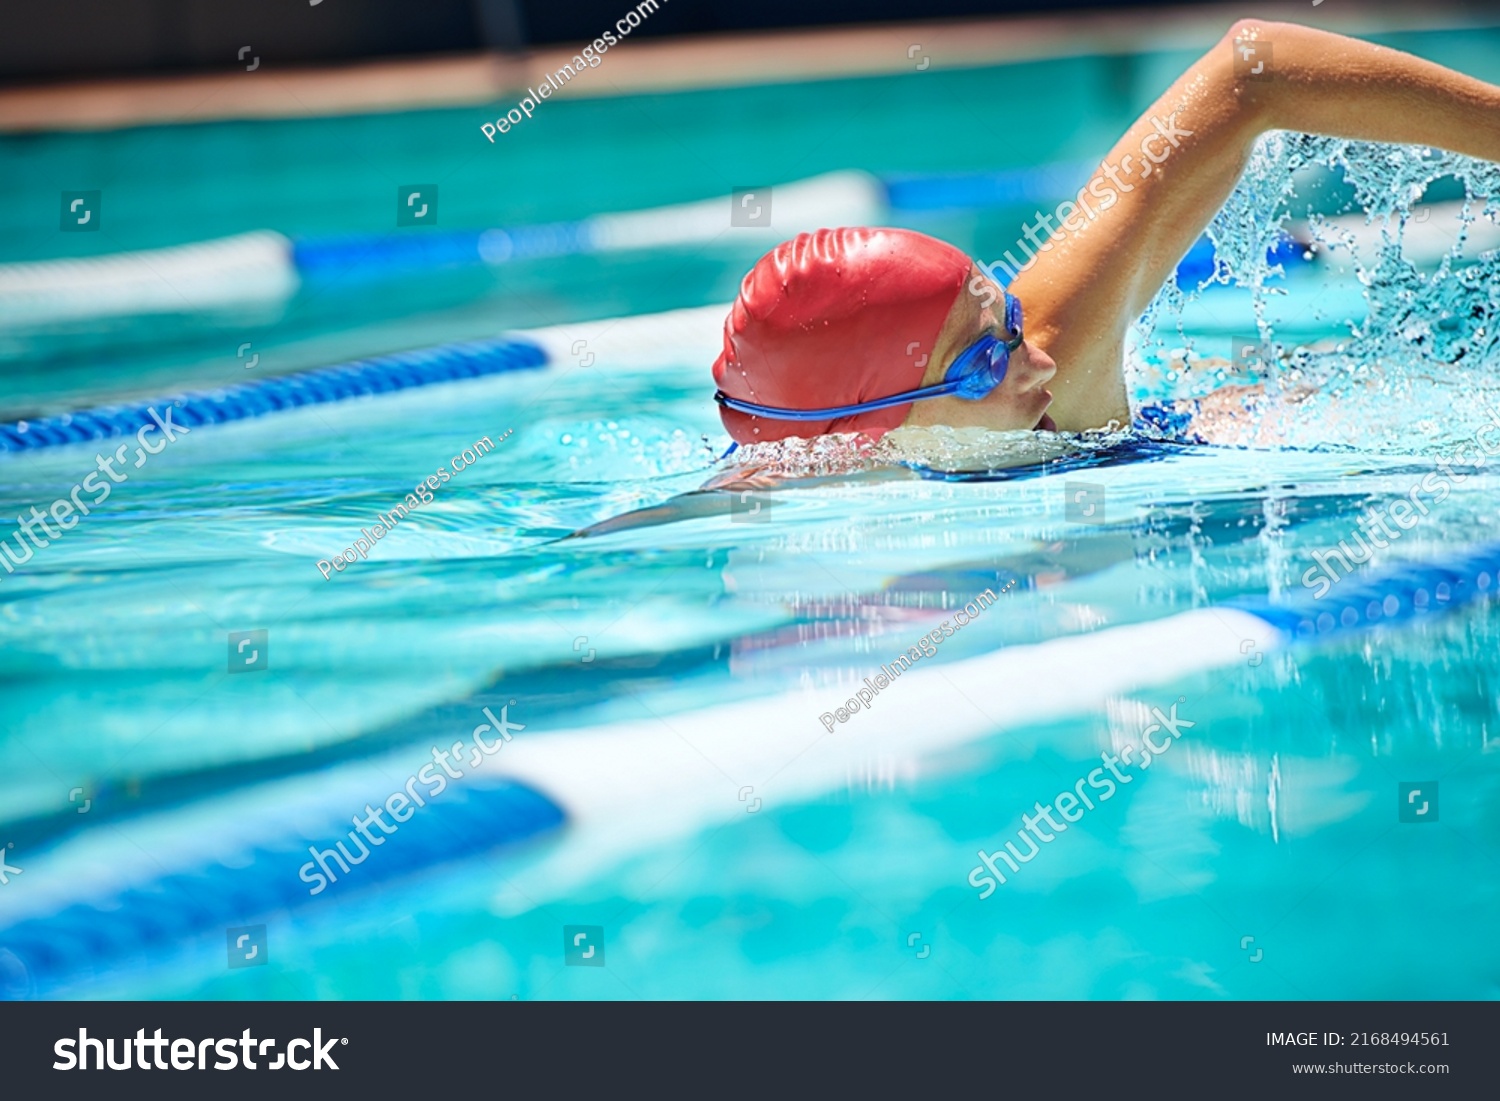 Working on her stroke. Shot of a professional female swimmer freestyle swimming in her lane. #2168494561